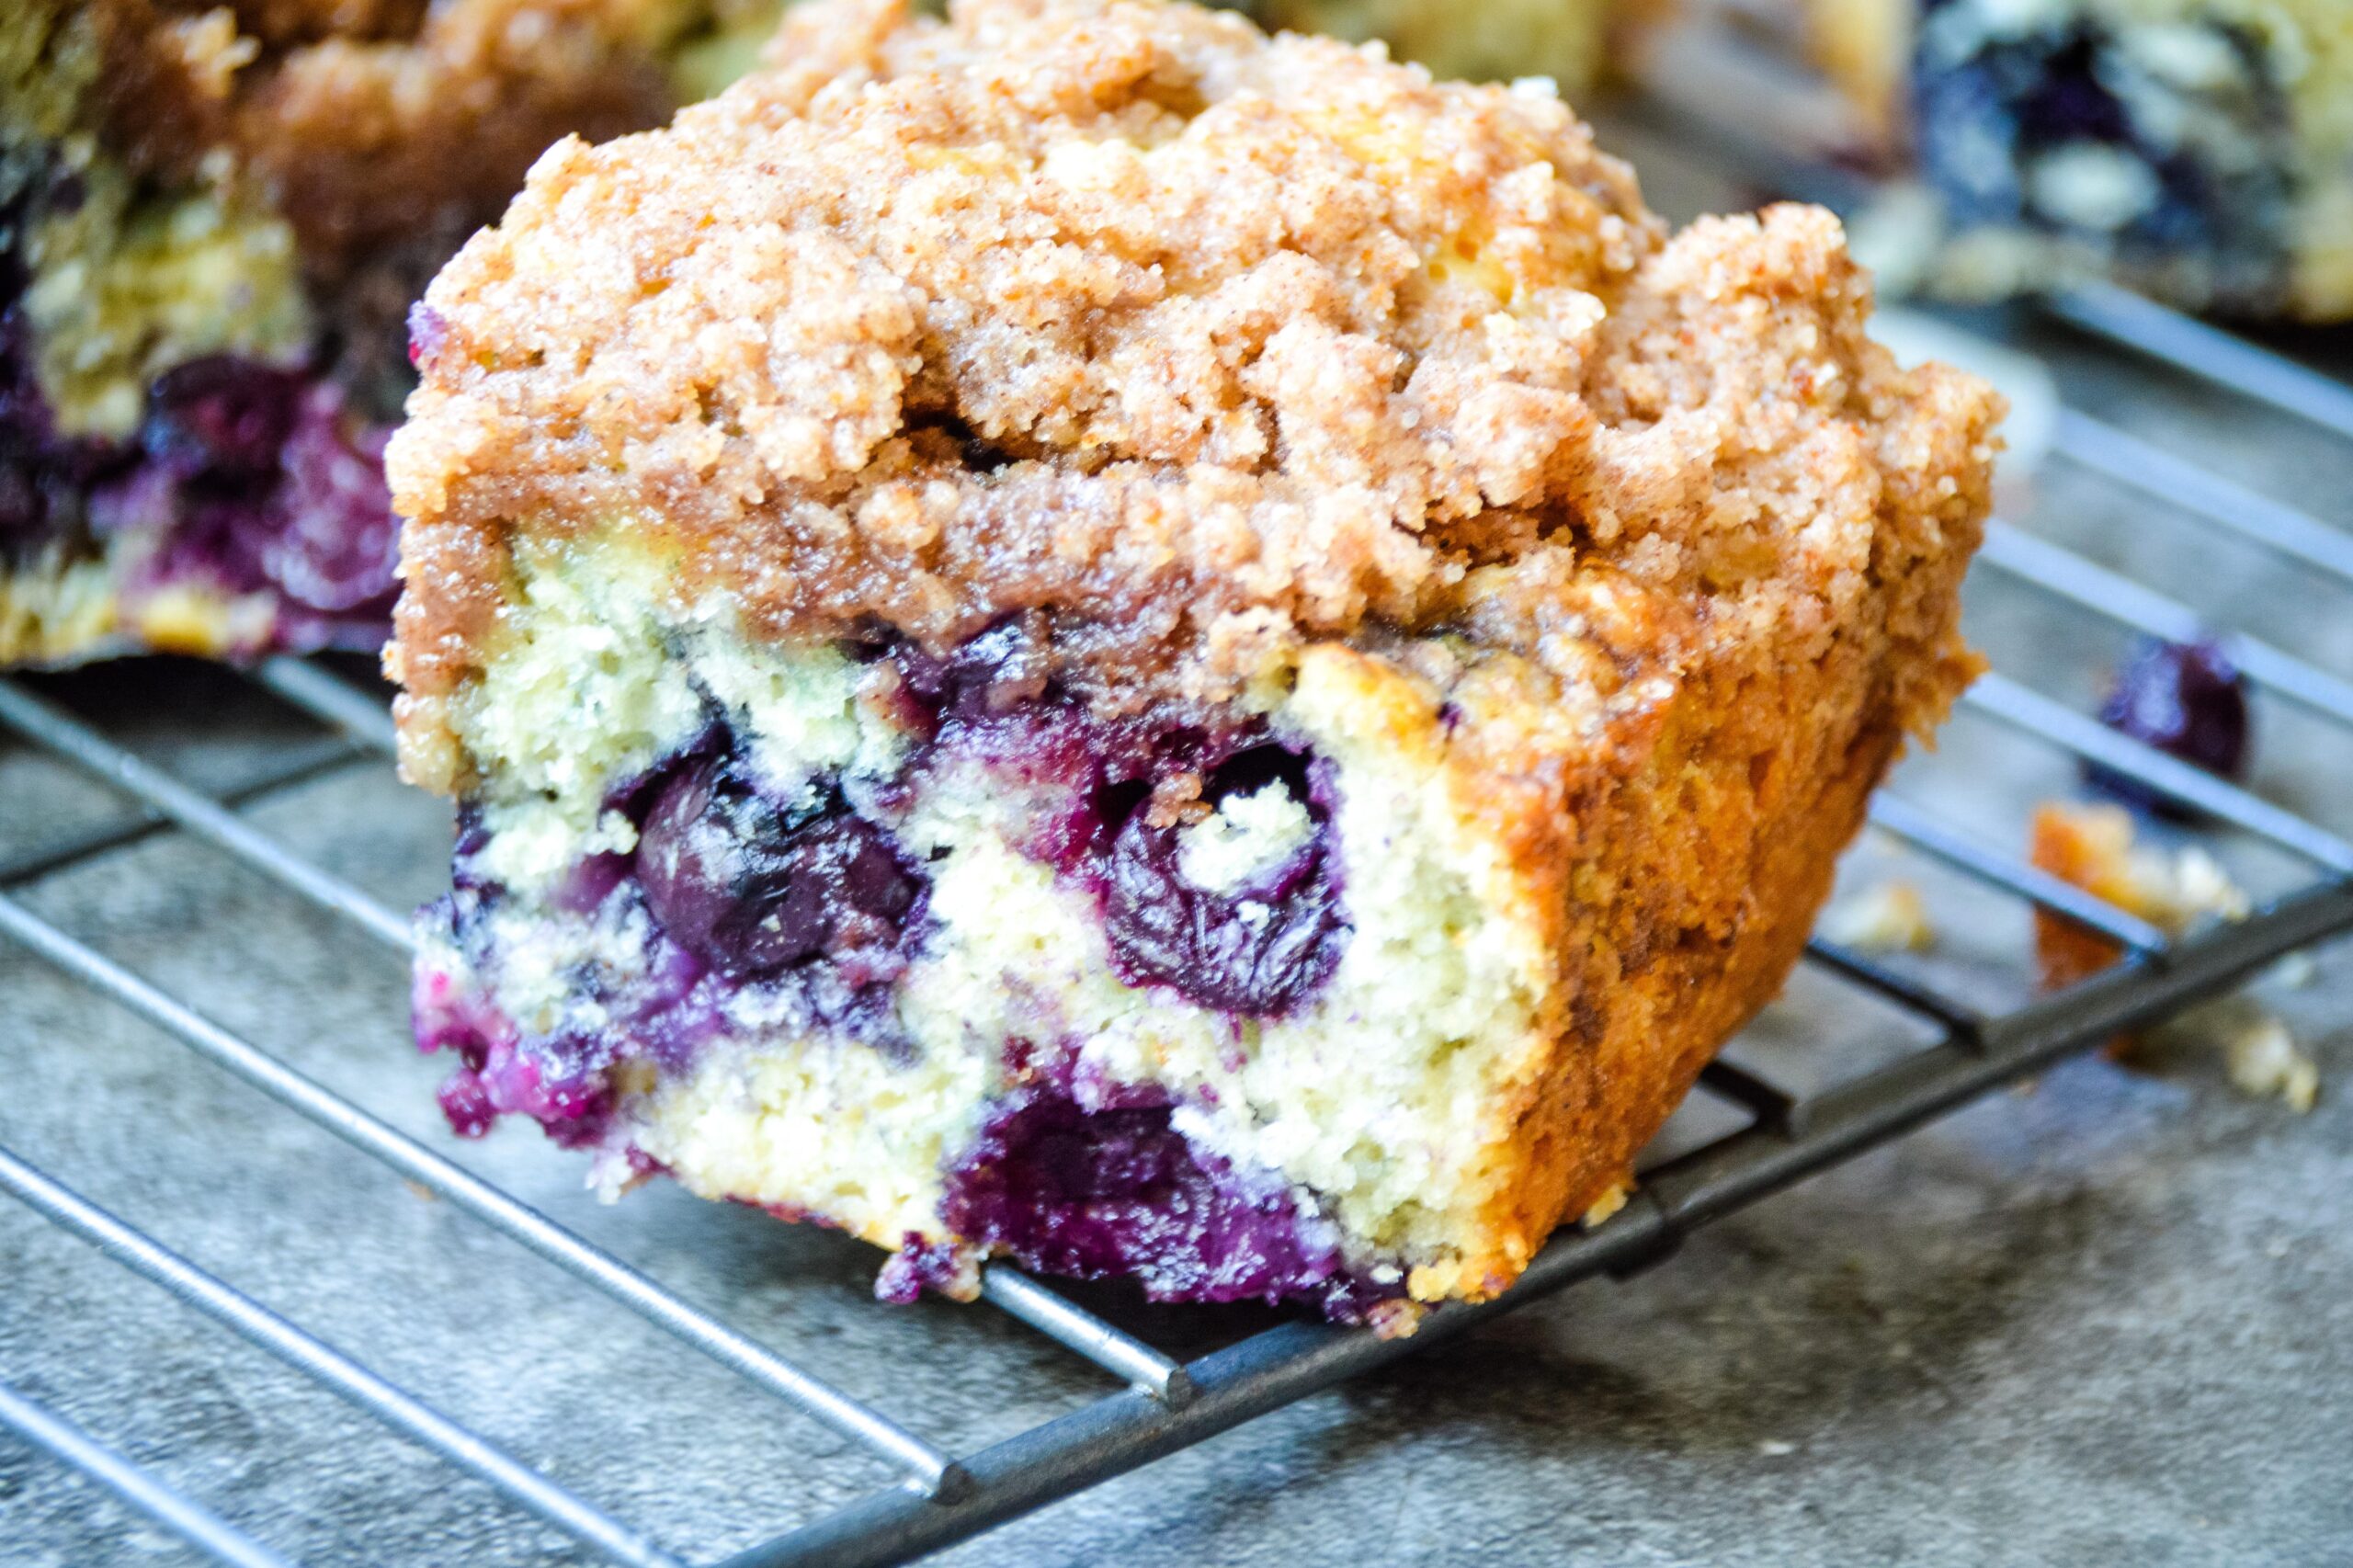  The perfect crumbly texture with a touch of juicy blueberries - an irresistible combo! 🤤